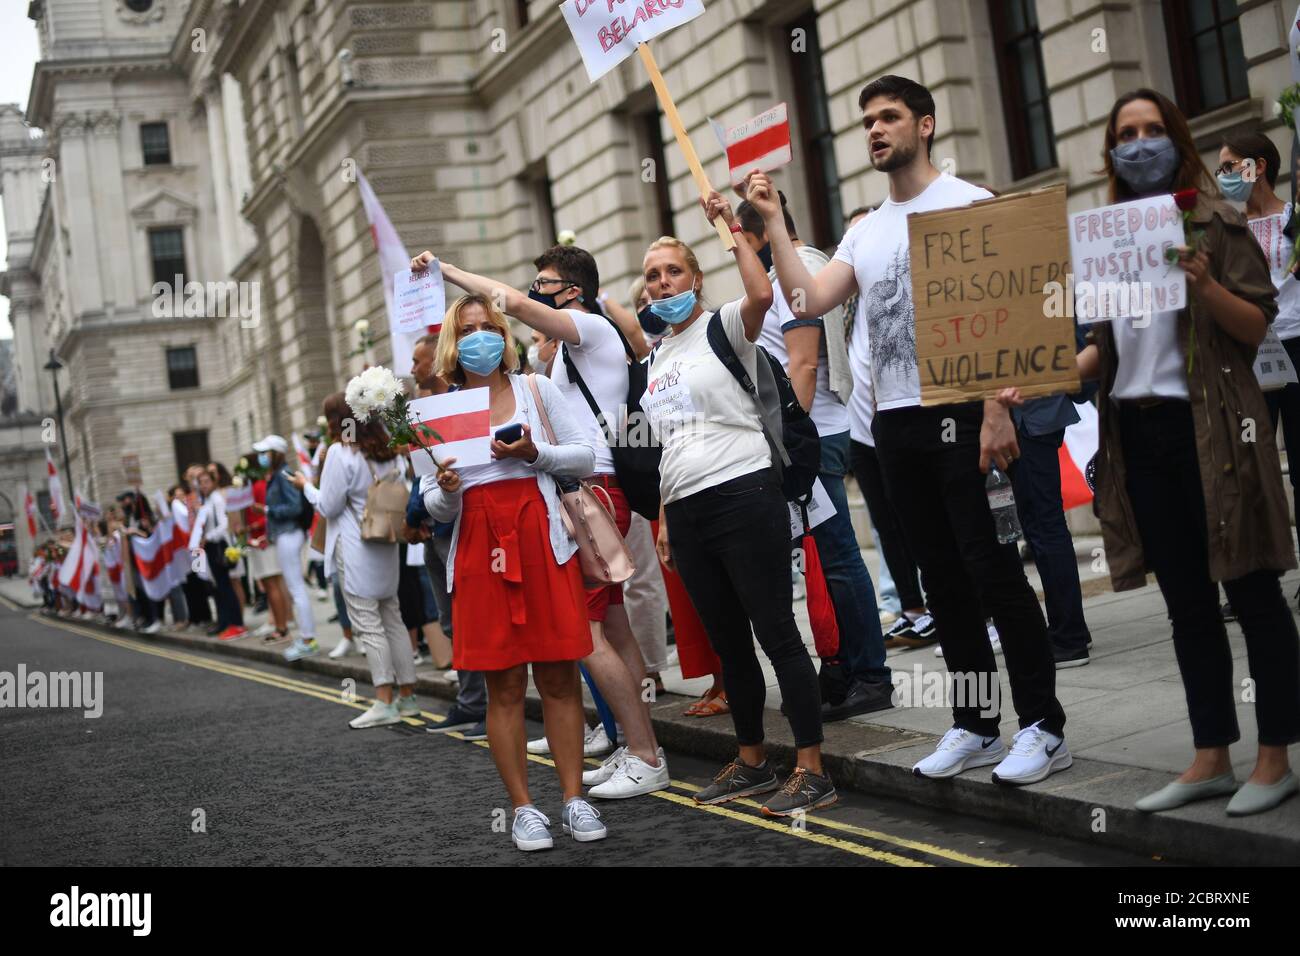 A demonstration outside the Foreign & Commonwealth Office in central London calling for authoritarian President Alexander Lukashenko to resign after 26 years in power following the results of the August 9 Belarus presidential election. Stock Photo